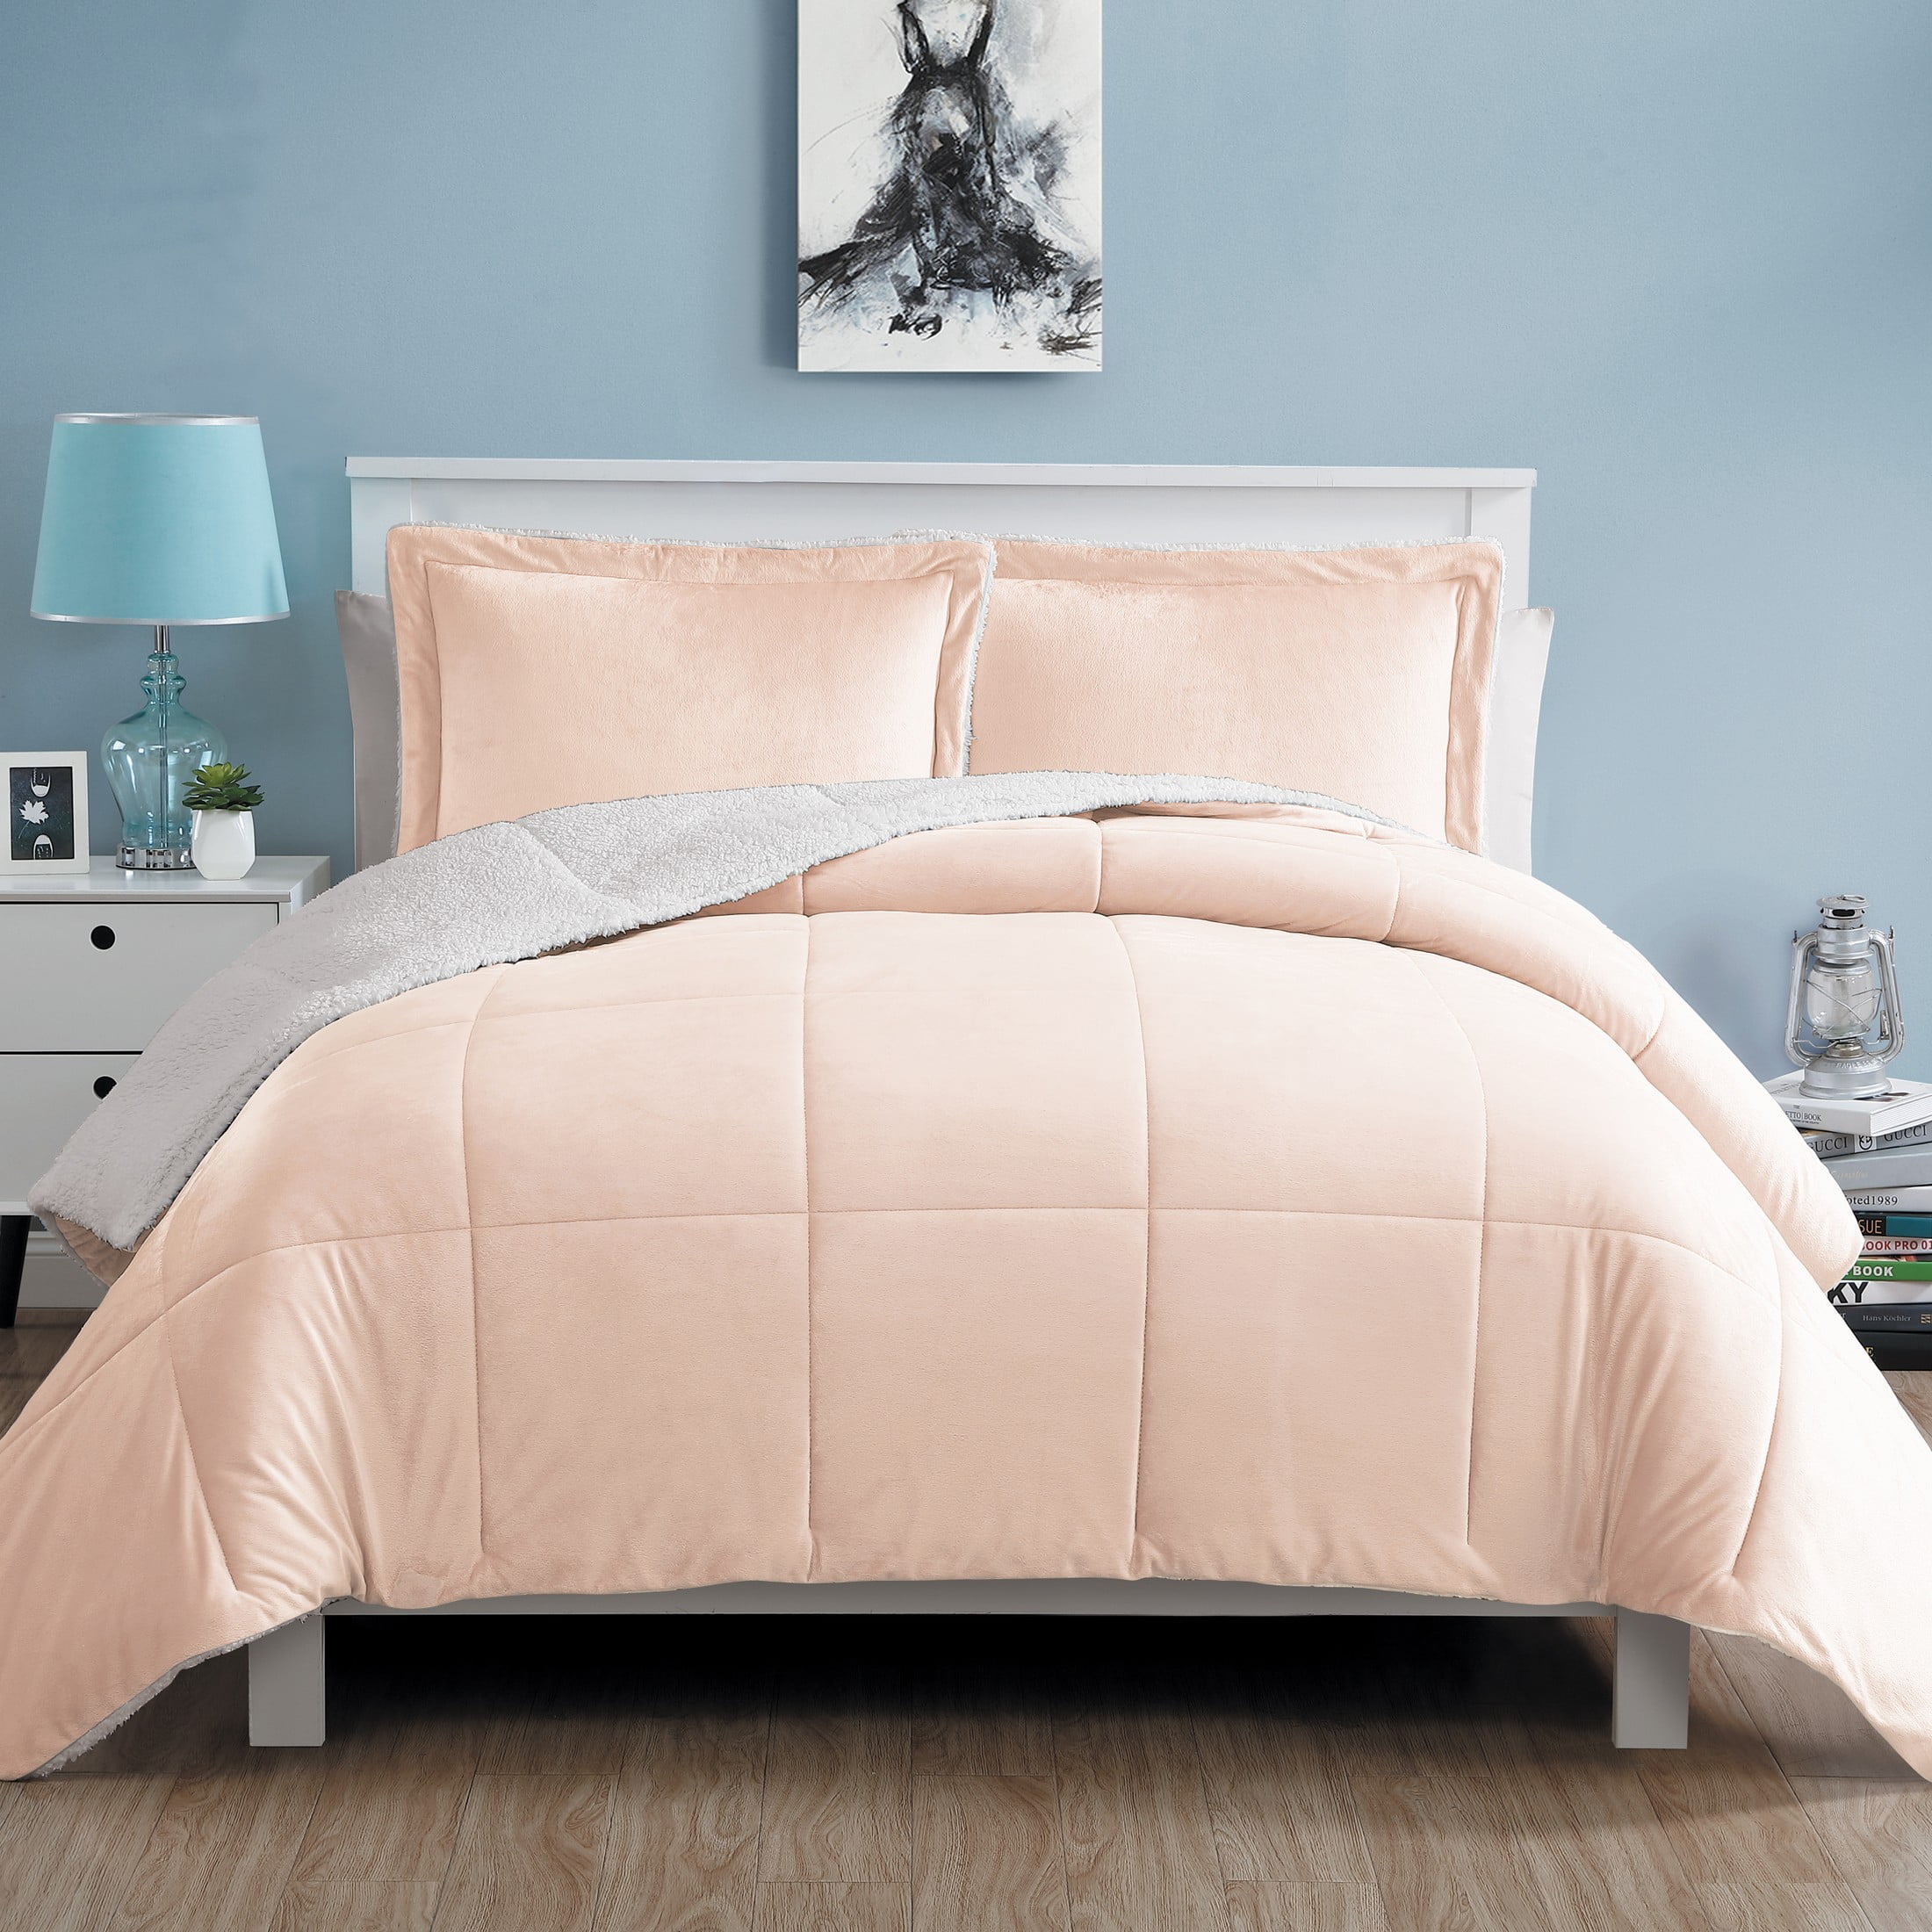 VCNY Home Micromink 3-Piece Blush Solid Polyester Comforter Set, Queen 